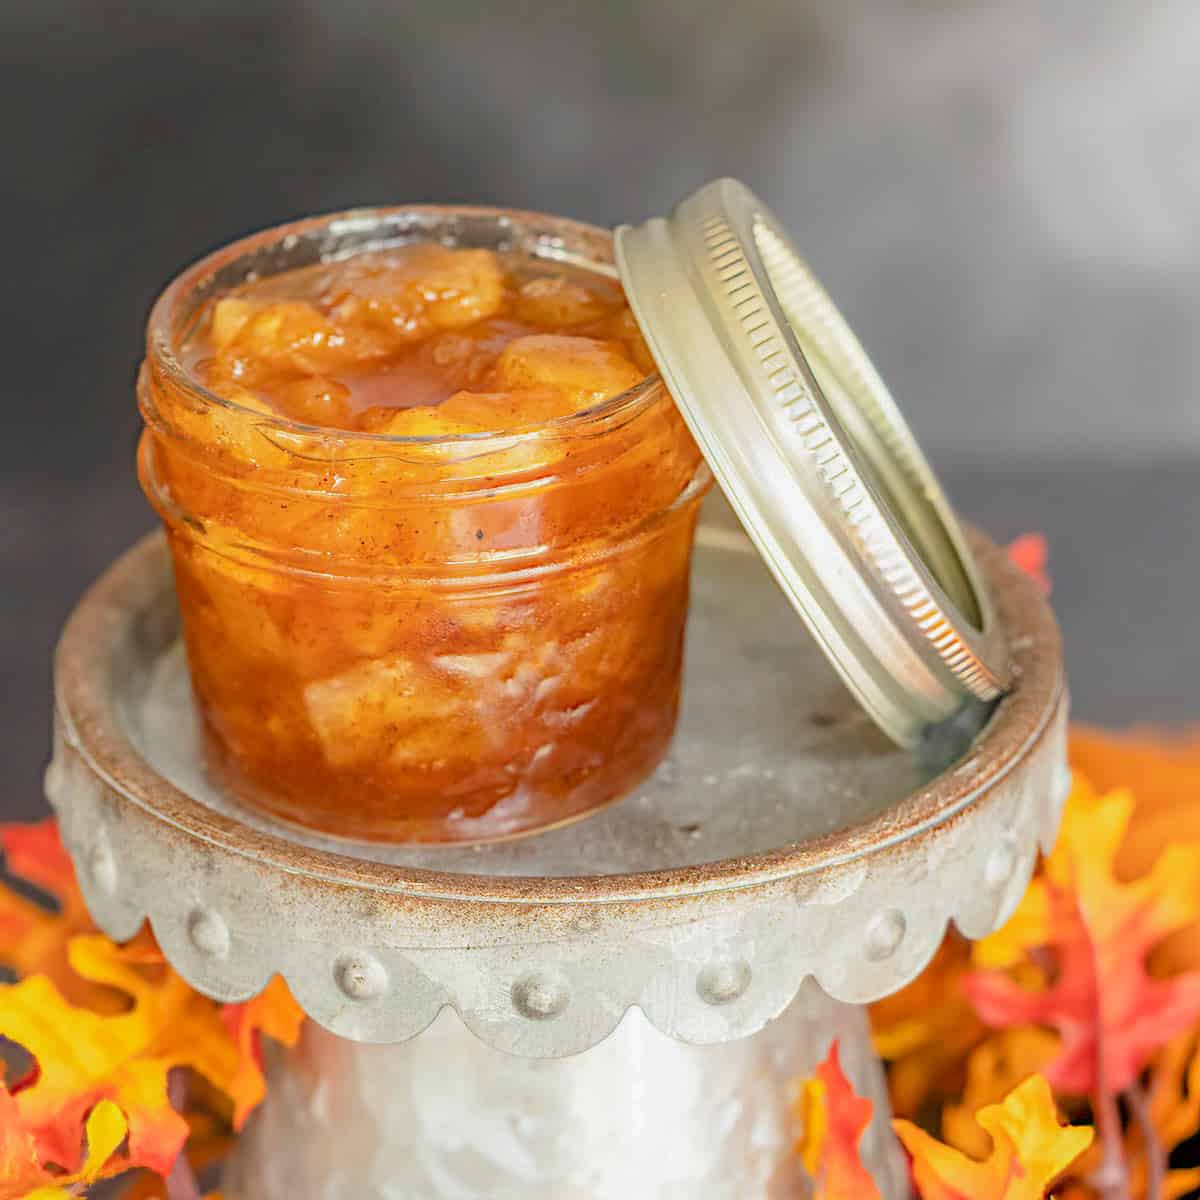 Chunky Apple Jam finished in a decorative jar.